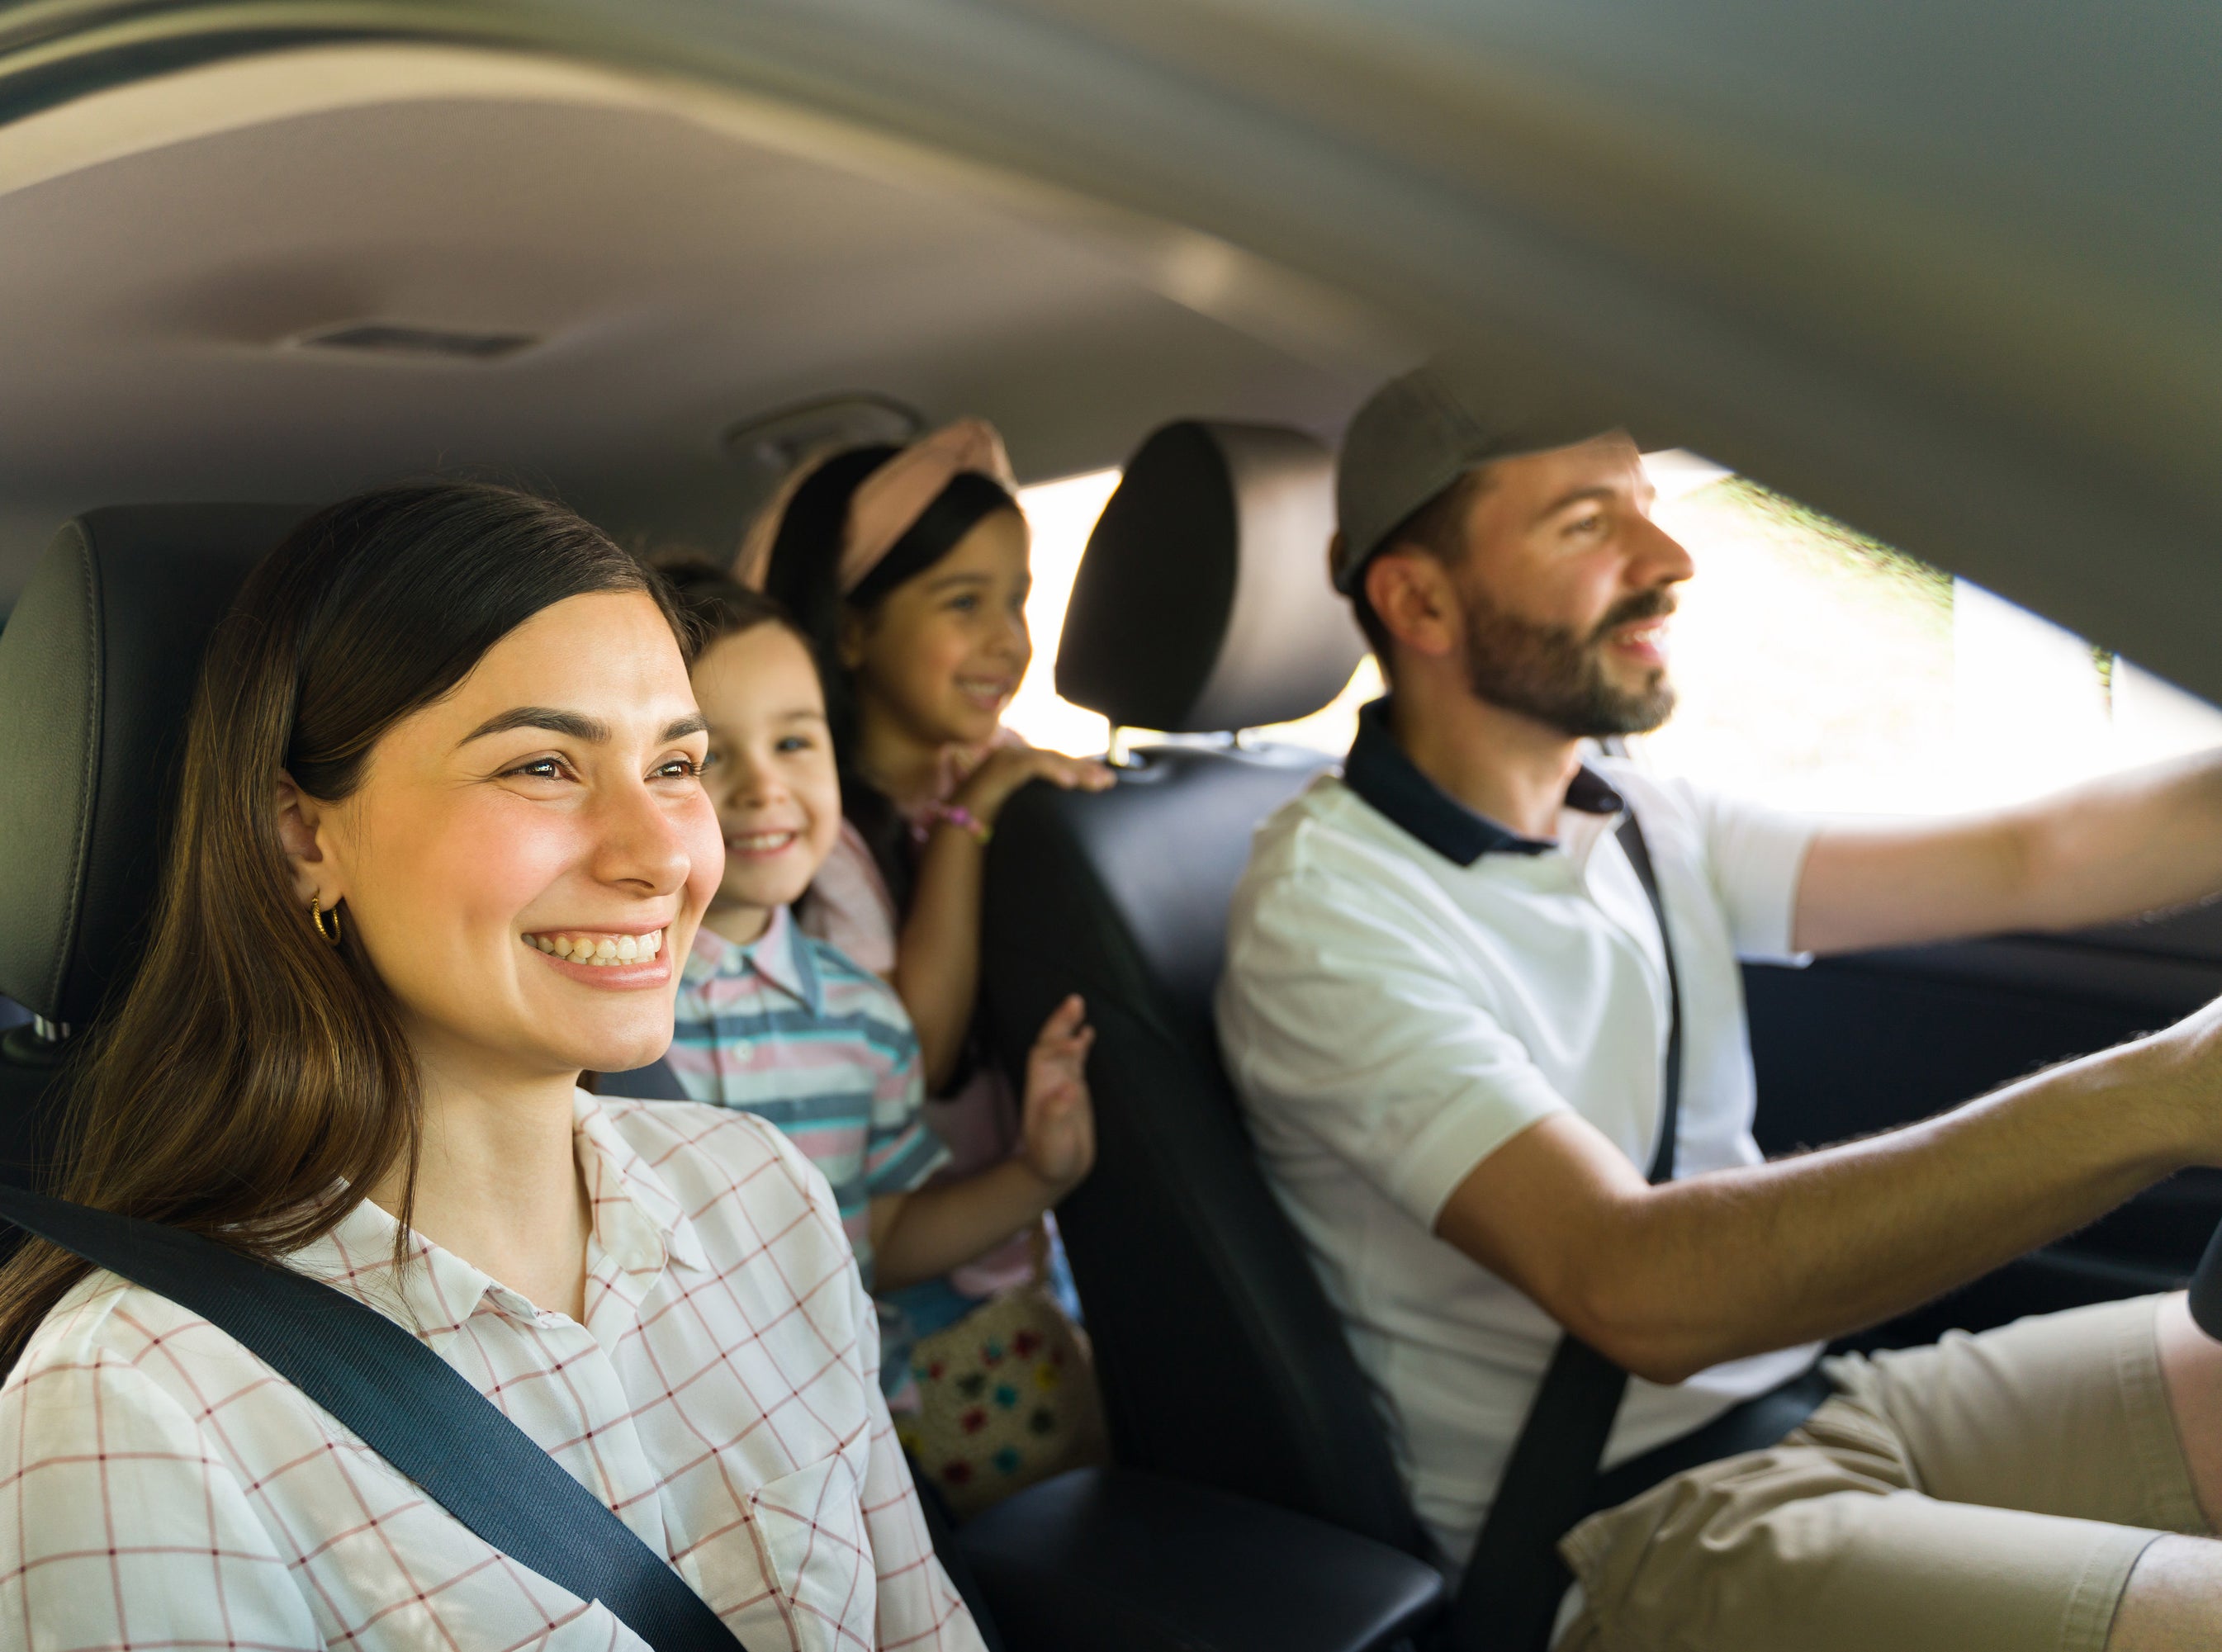 A couple and their kids smiles as they embark on a road trip together